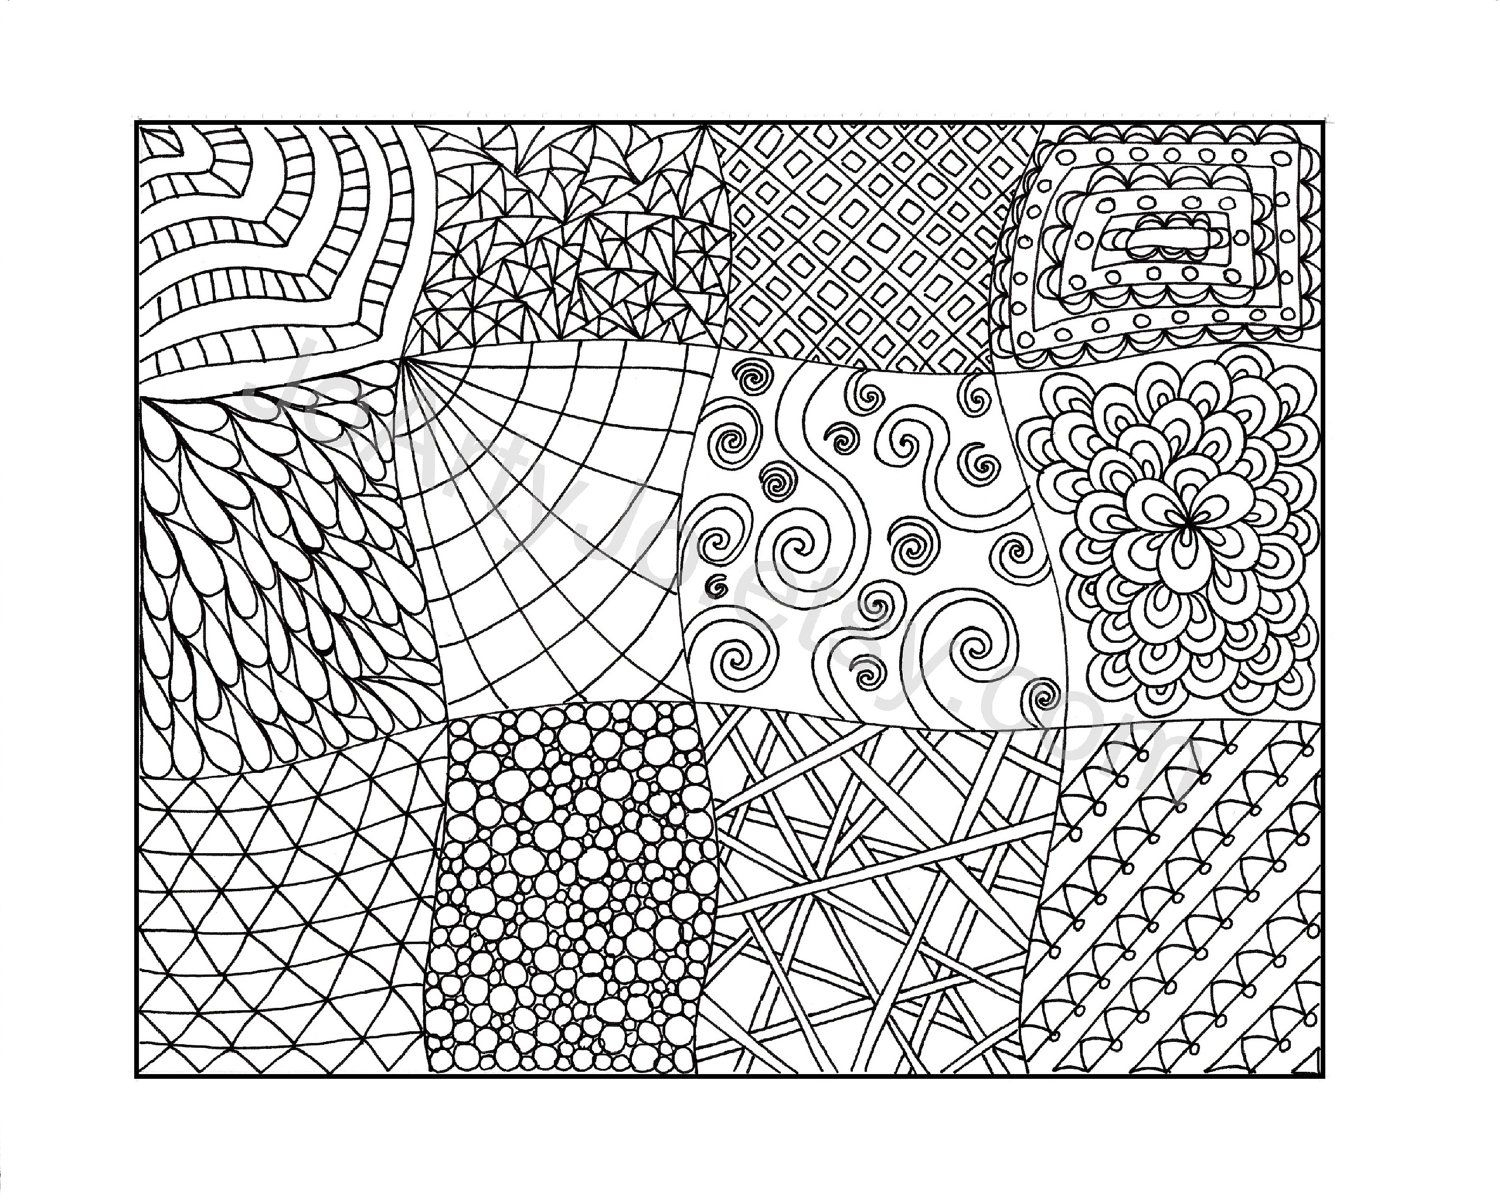 Zendoodle Coloring Page, Printable Pdf, Zentangle Inspired- Page 11 - Free Printable Zentangle Templates